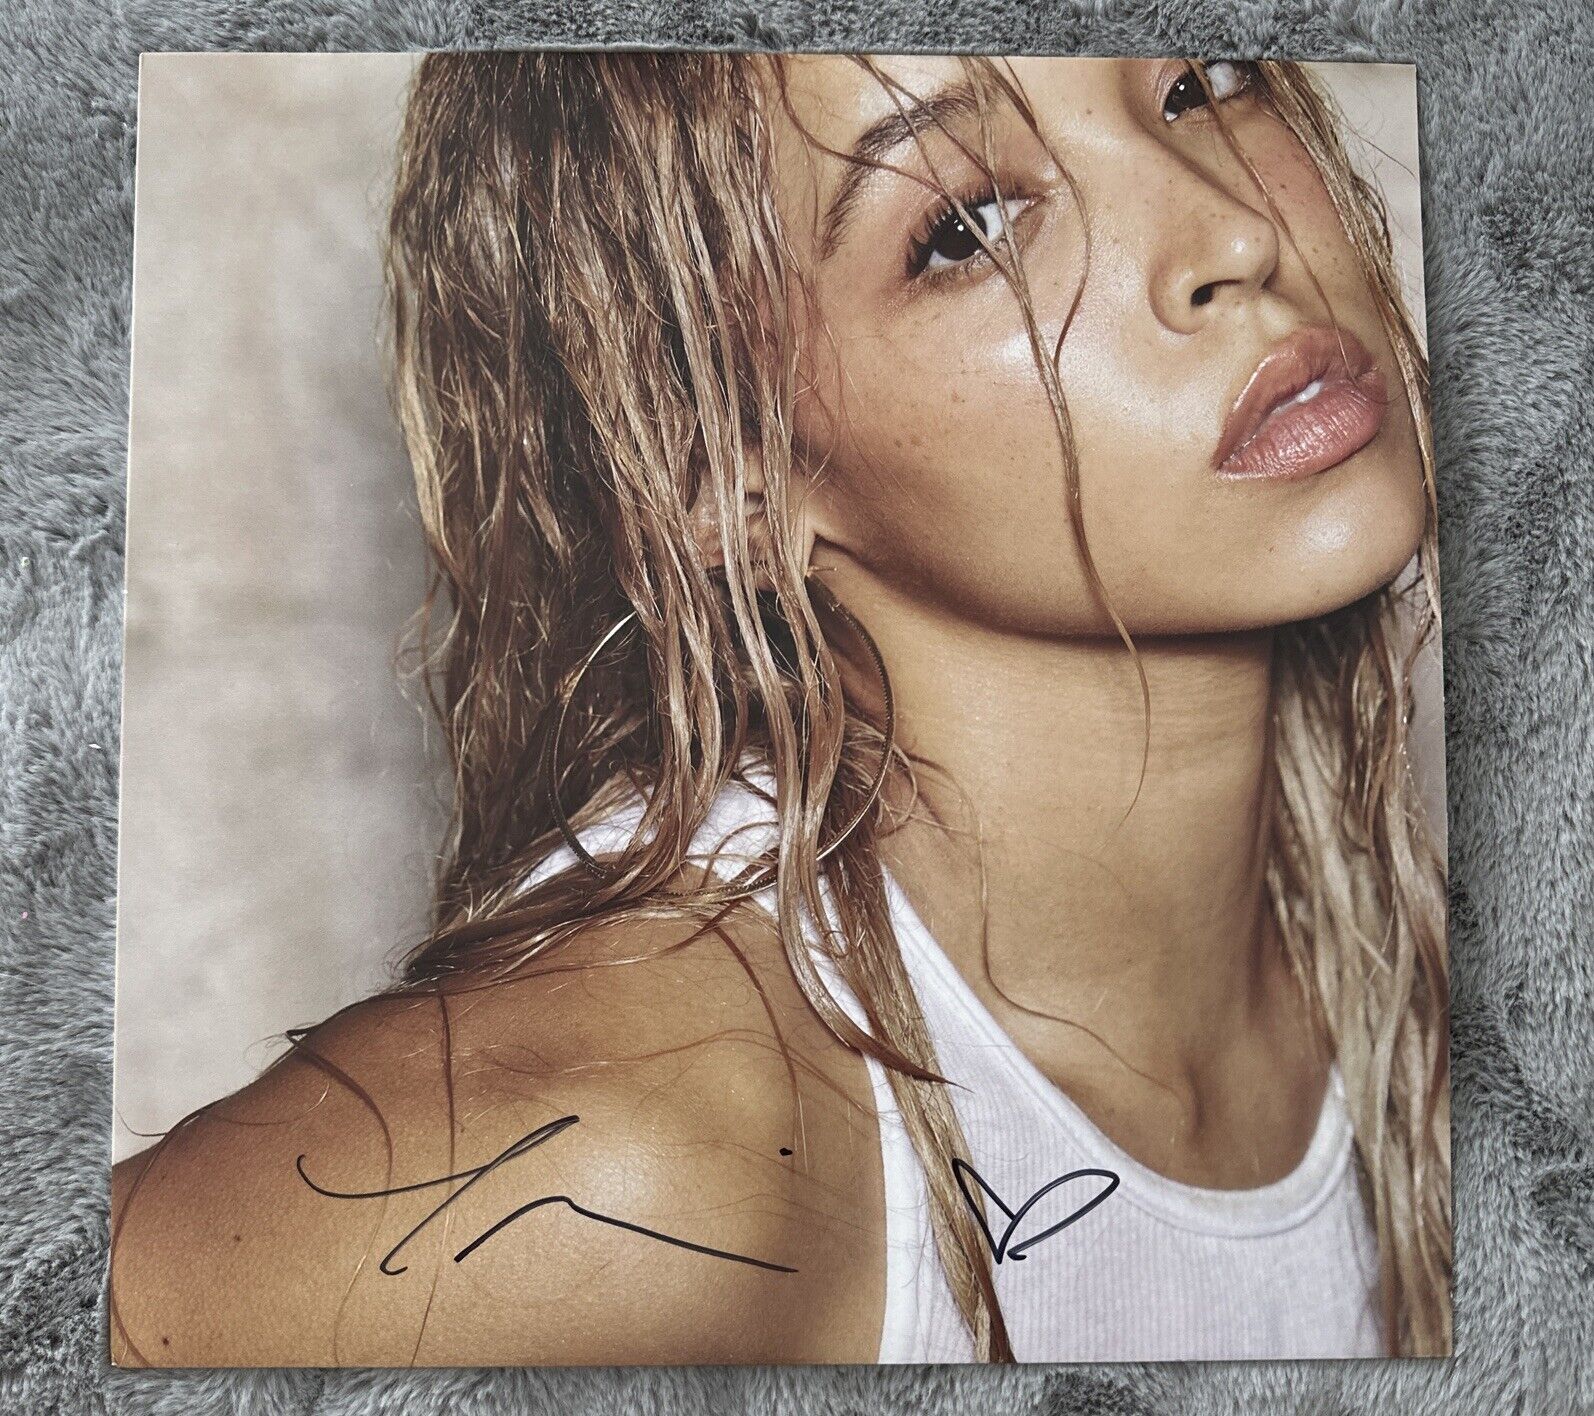 *SINGED* Tinashe BB/ANG3L Black Vinyl LP Signed Autographed New QTY